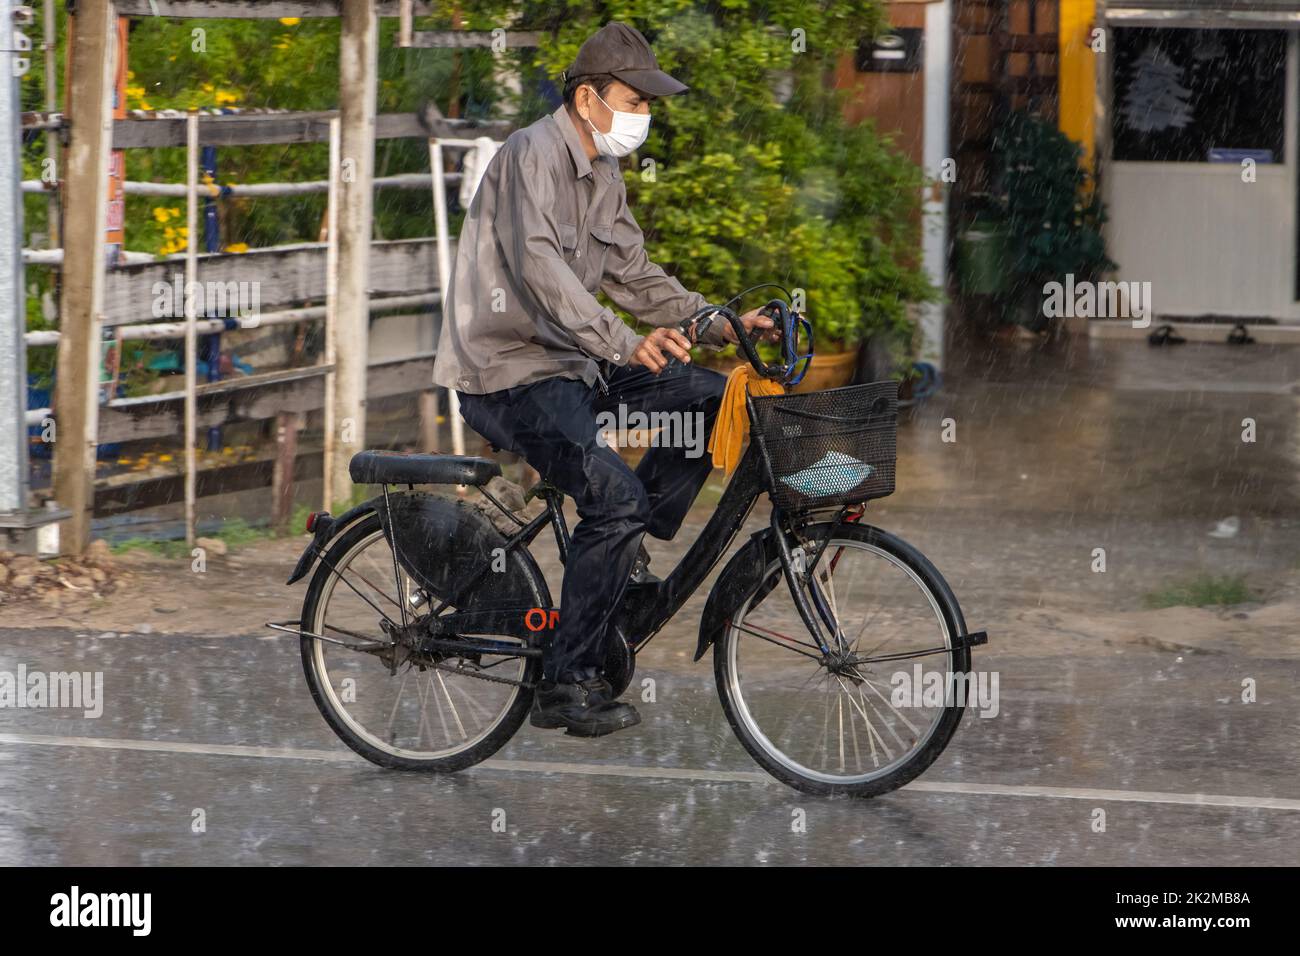 SAMUT PRAKAN, THAILAND, SEP 21 2022, A man rides a bicycle on the street in heavy rain Stock Photo